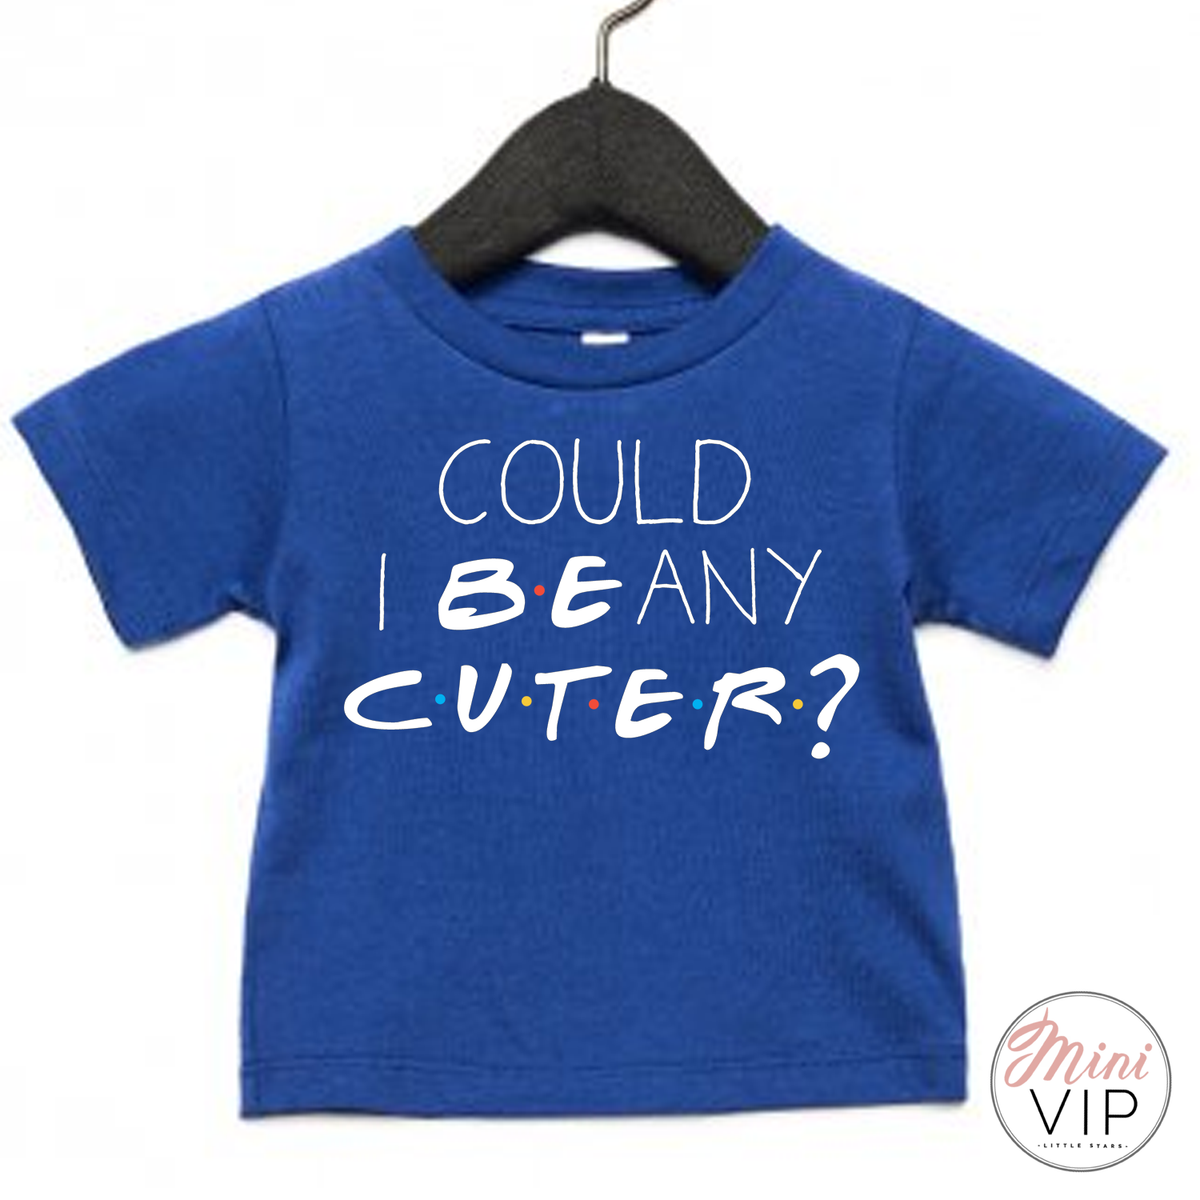 Could I BE any cuter? t-shirt